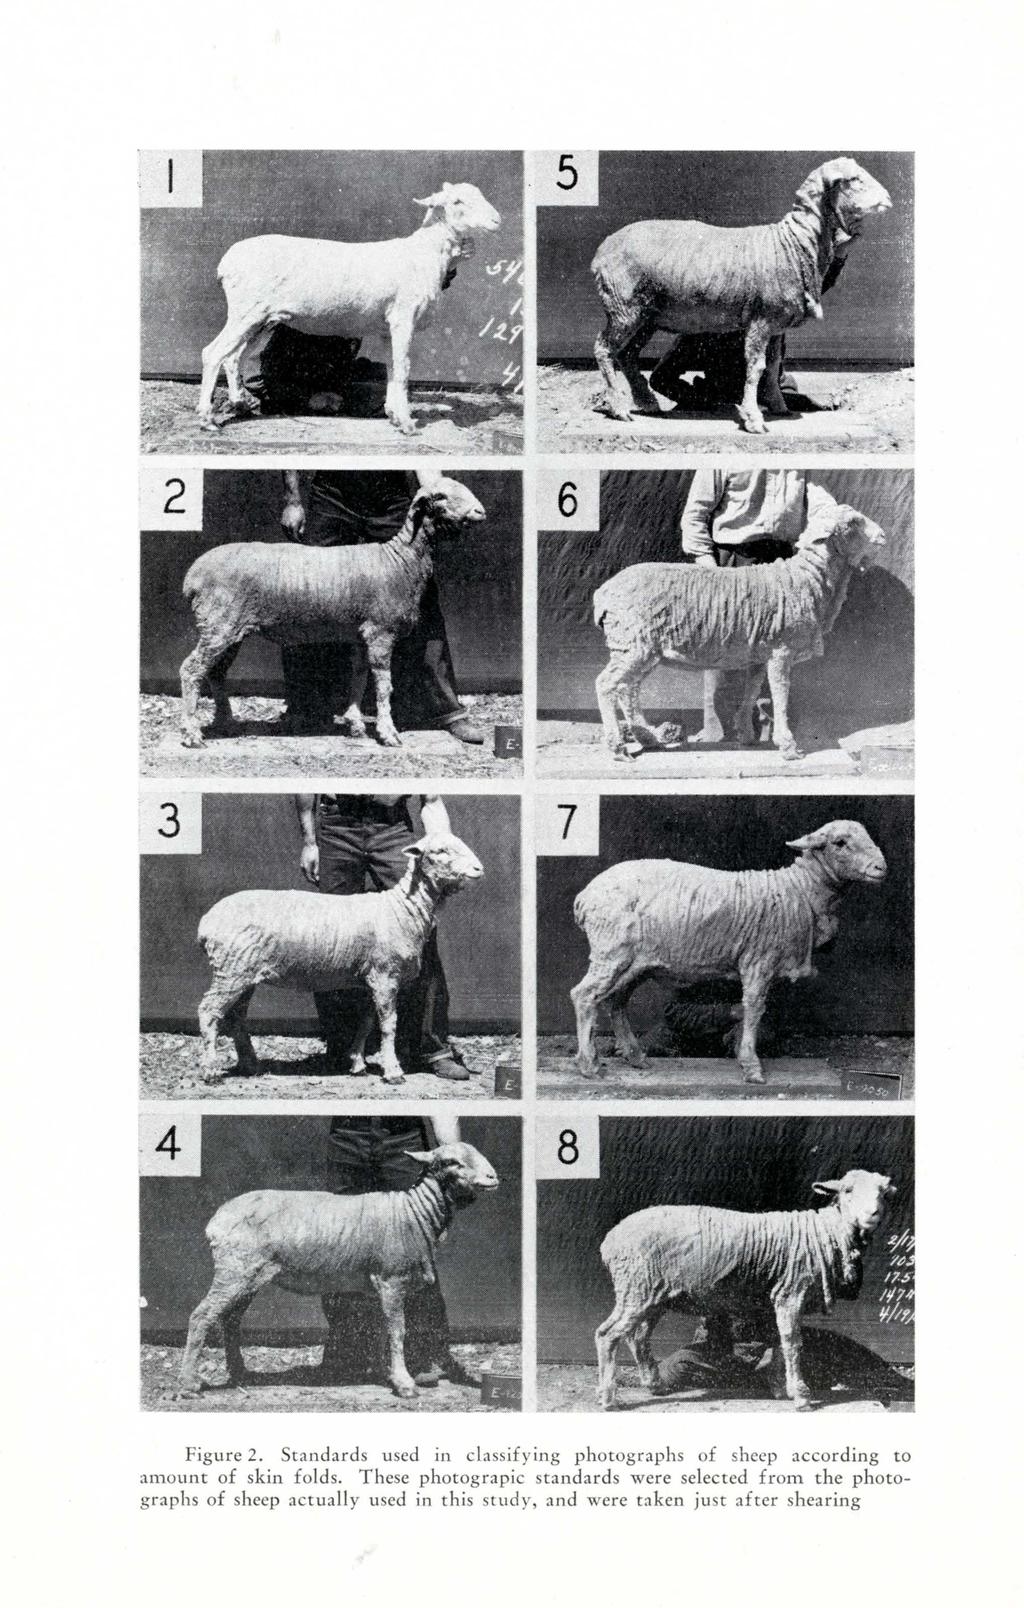 Figure 2. Standards used in classifying photographs of sheep according to amount of skin folds.